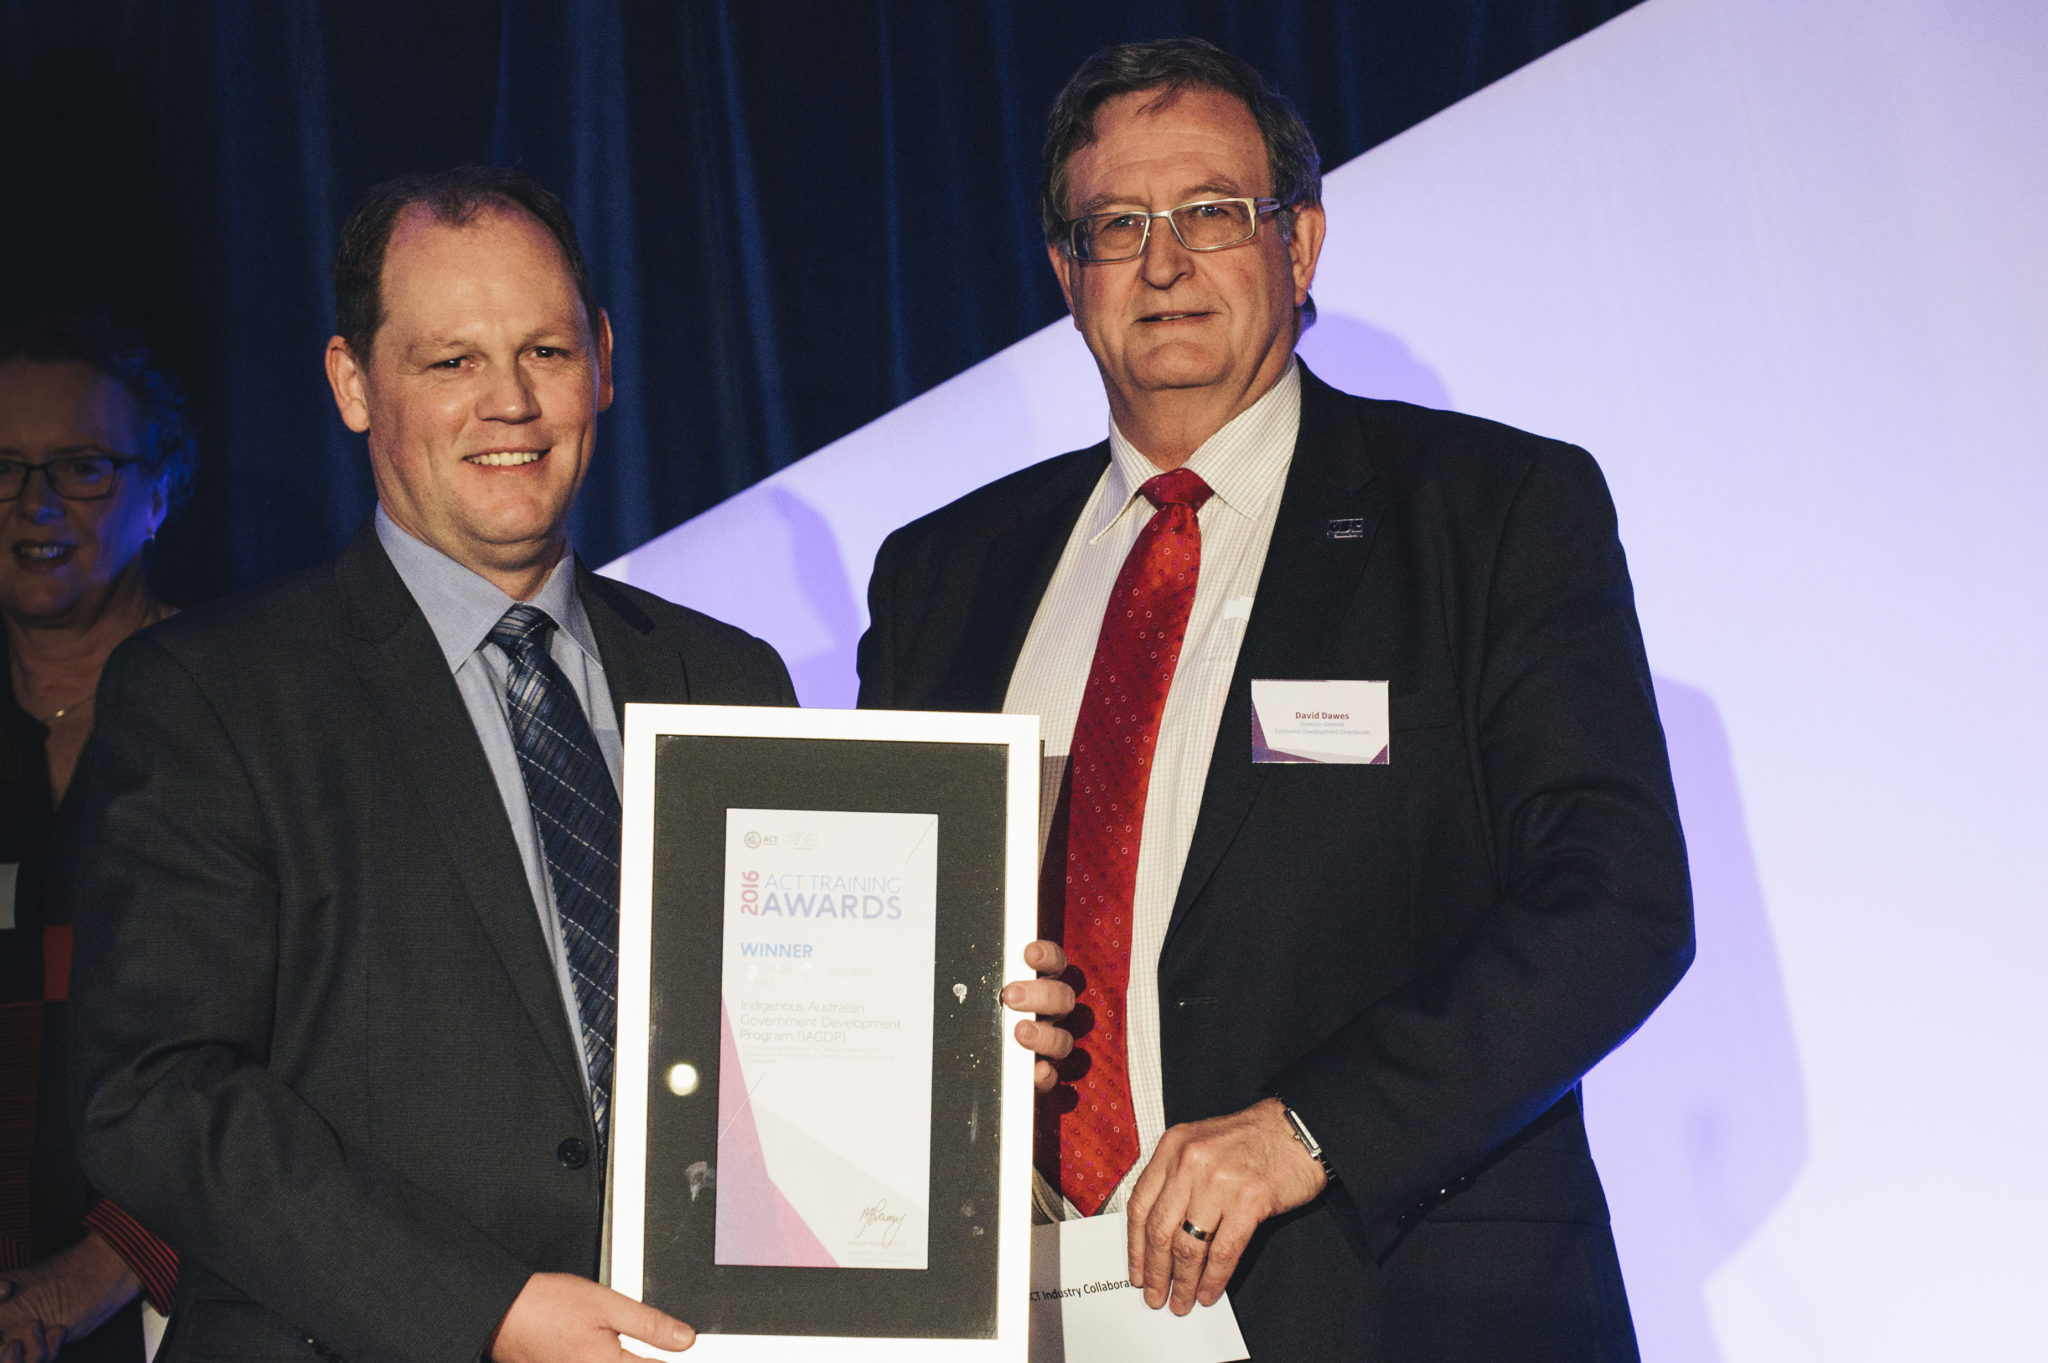 Michael Young CEO of Transformed - accepting award from David Dawes Director-General, Economic Development, Land Development Agency.